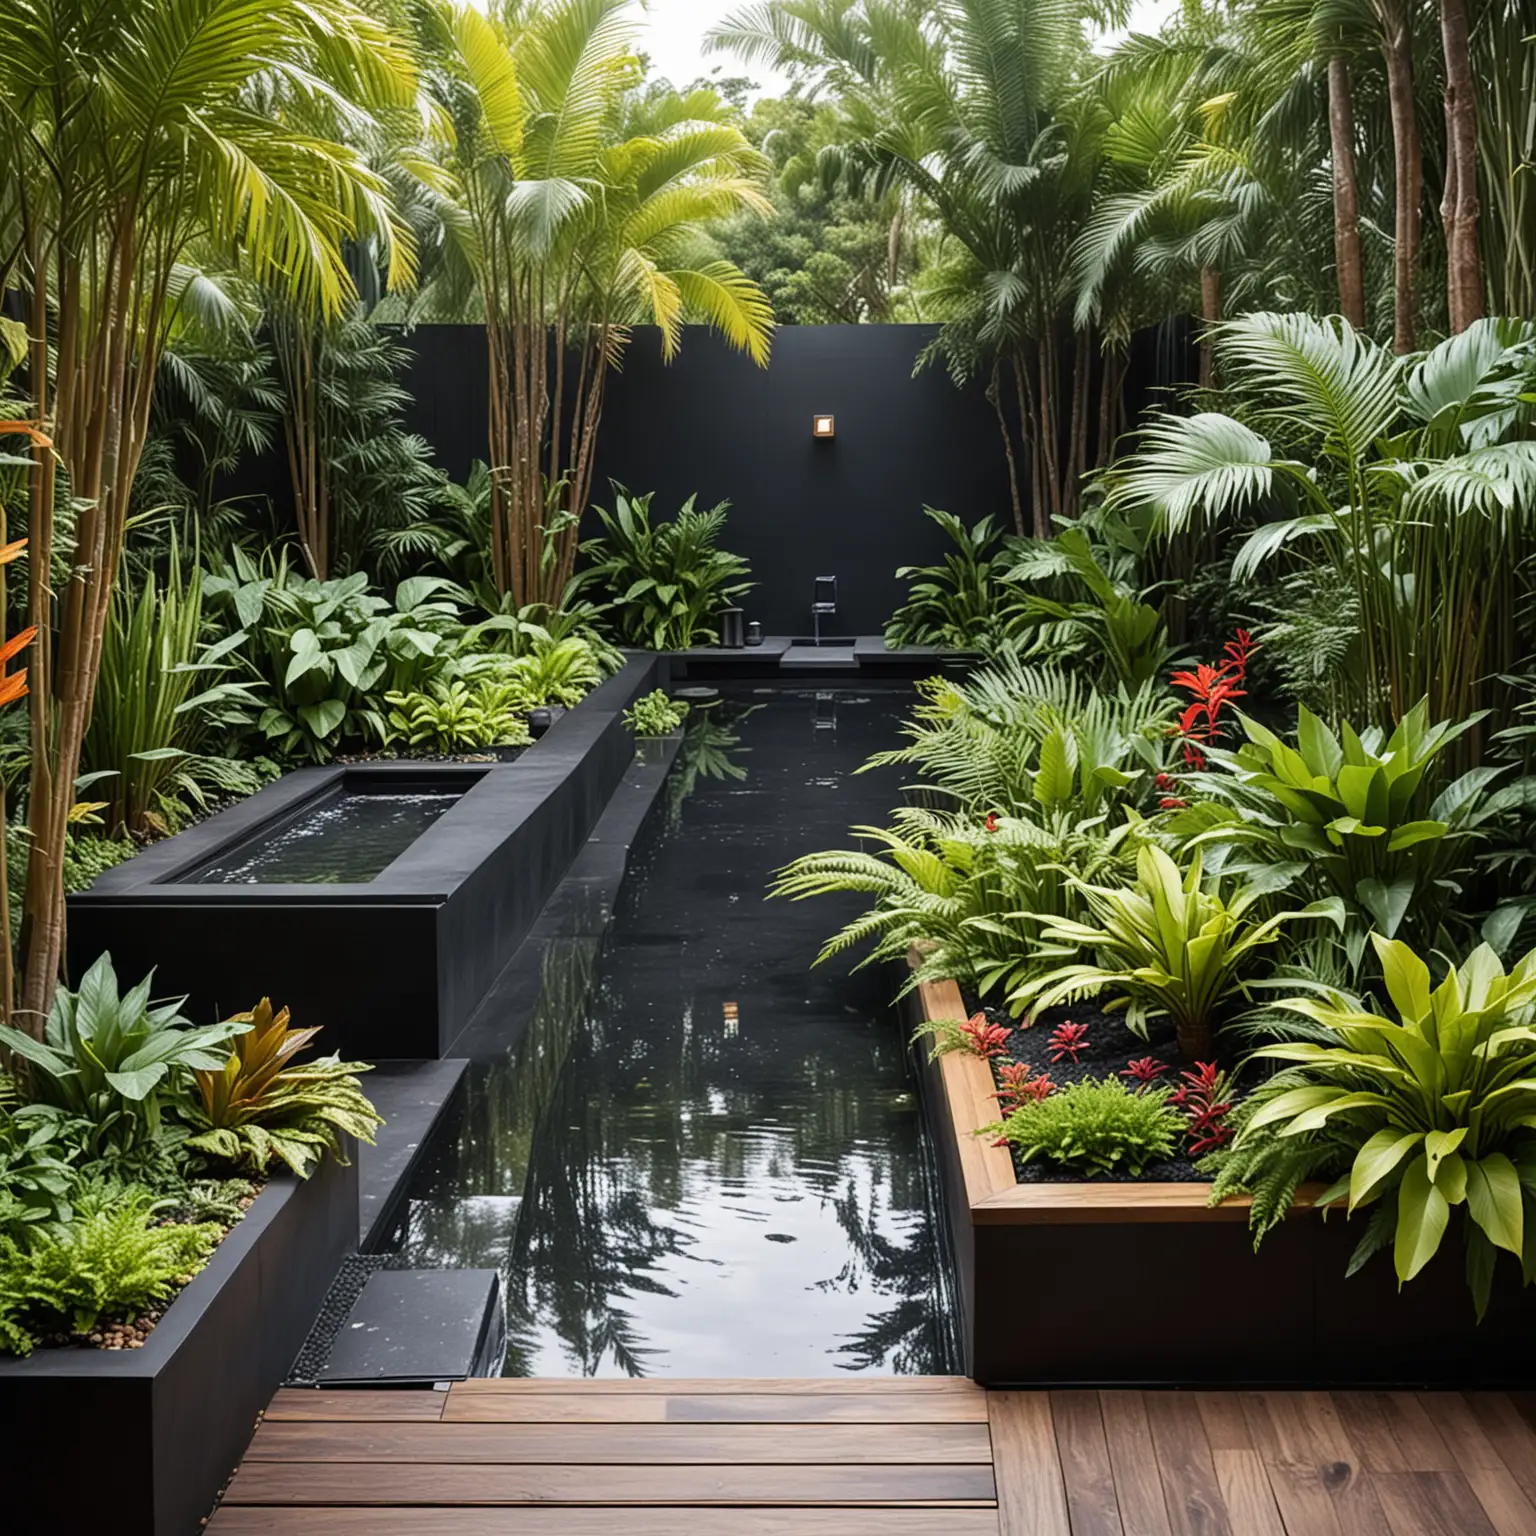 a wide shot of a modern garden with a central wooden deck surrounded by raised planters filled with tropical plants like palms, birds-of-paradise, and ferns. Include a sleek, linear water feature made of black granite and a modern metal gate at the entrance. The garden also features a container house with a rooftop terrace, providing a vantage point to enjoy the lush garden below. Set this scene on a bright, sunny afternoon, with the vibrant colors of the plants and the reflective surfaces of the water feature creating a striking visual contrast, enhanced by strategically placed lighting.